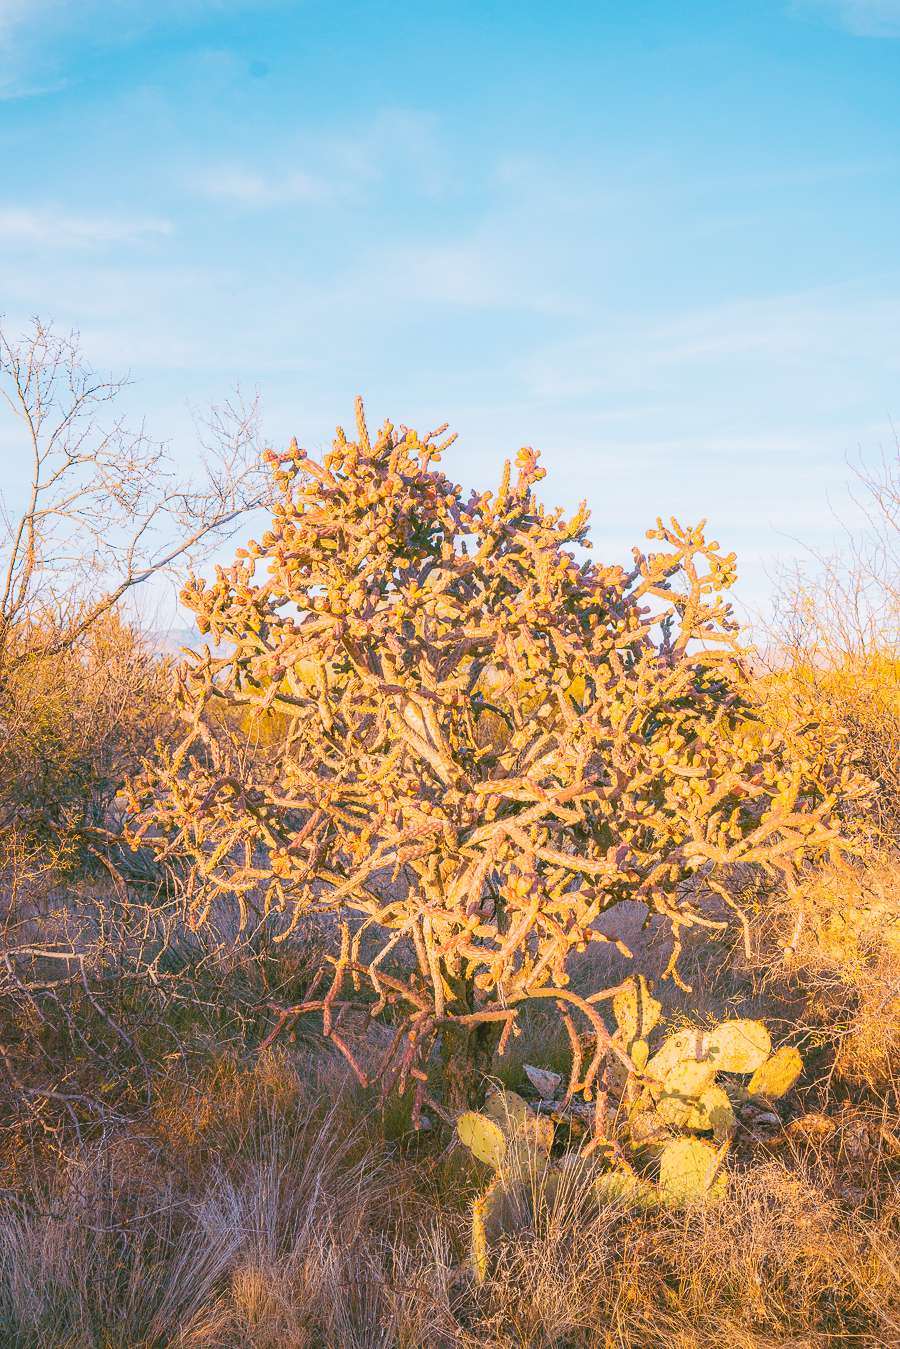 Things to Do in Saguaro National Park